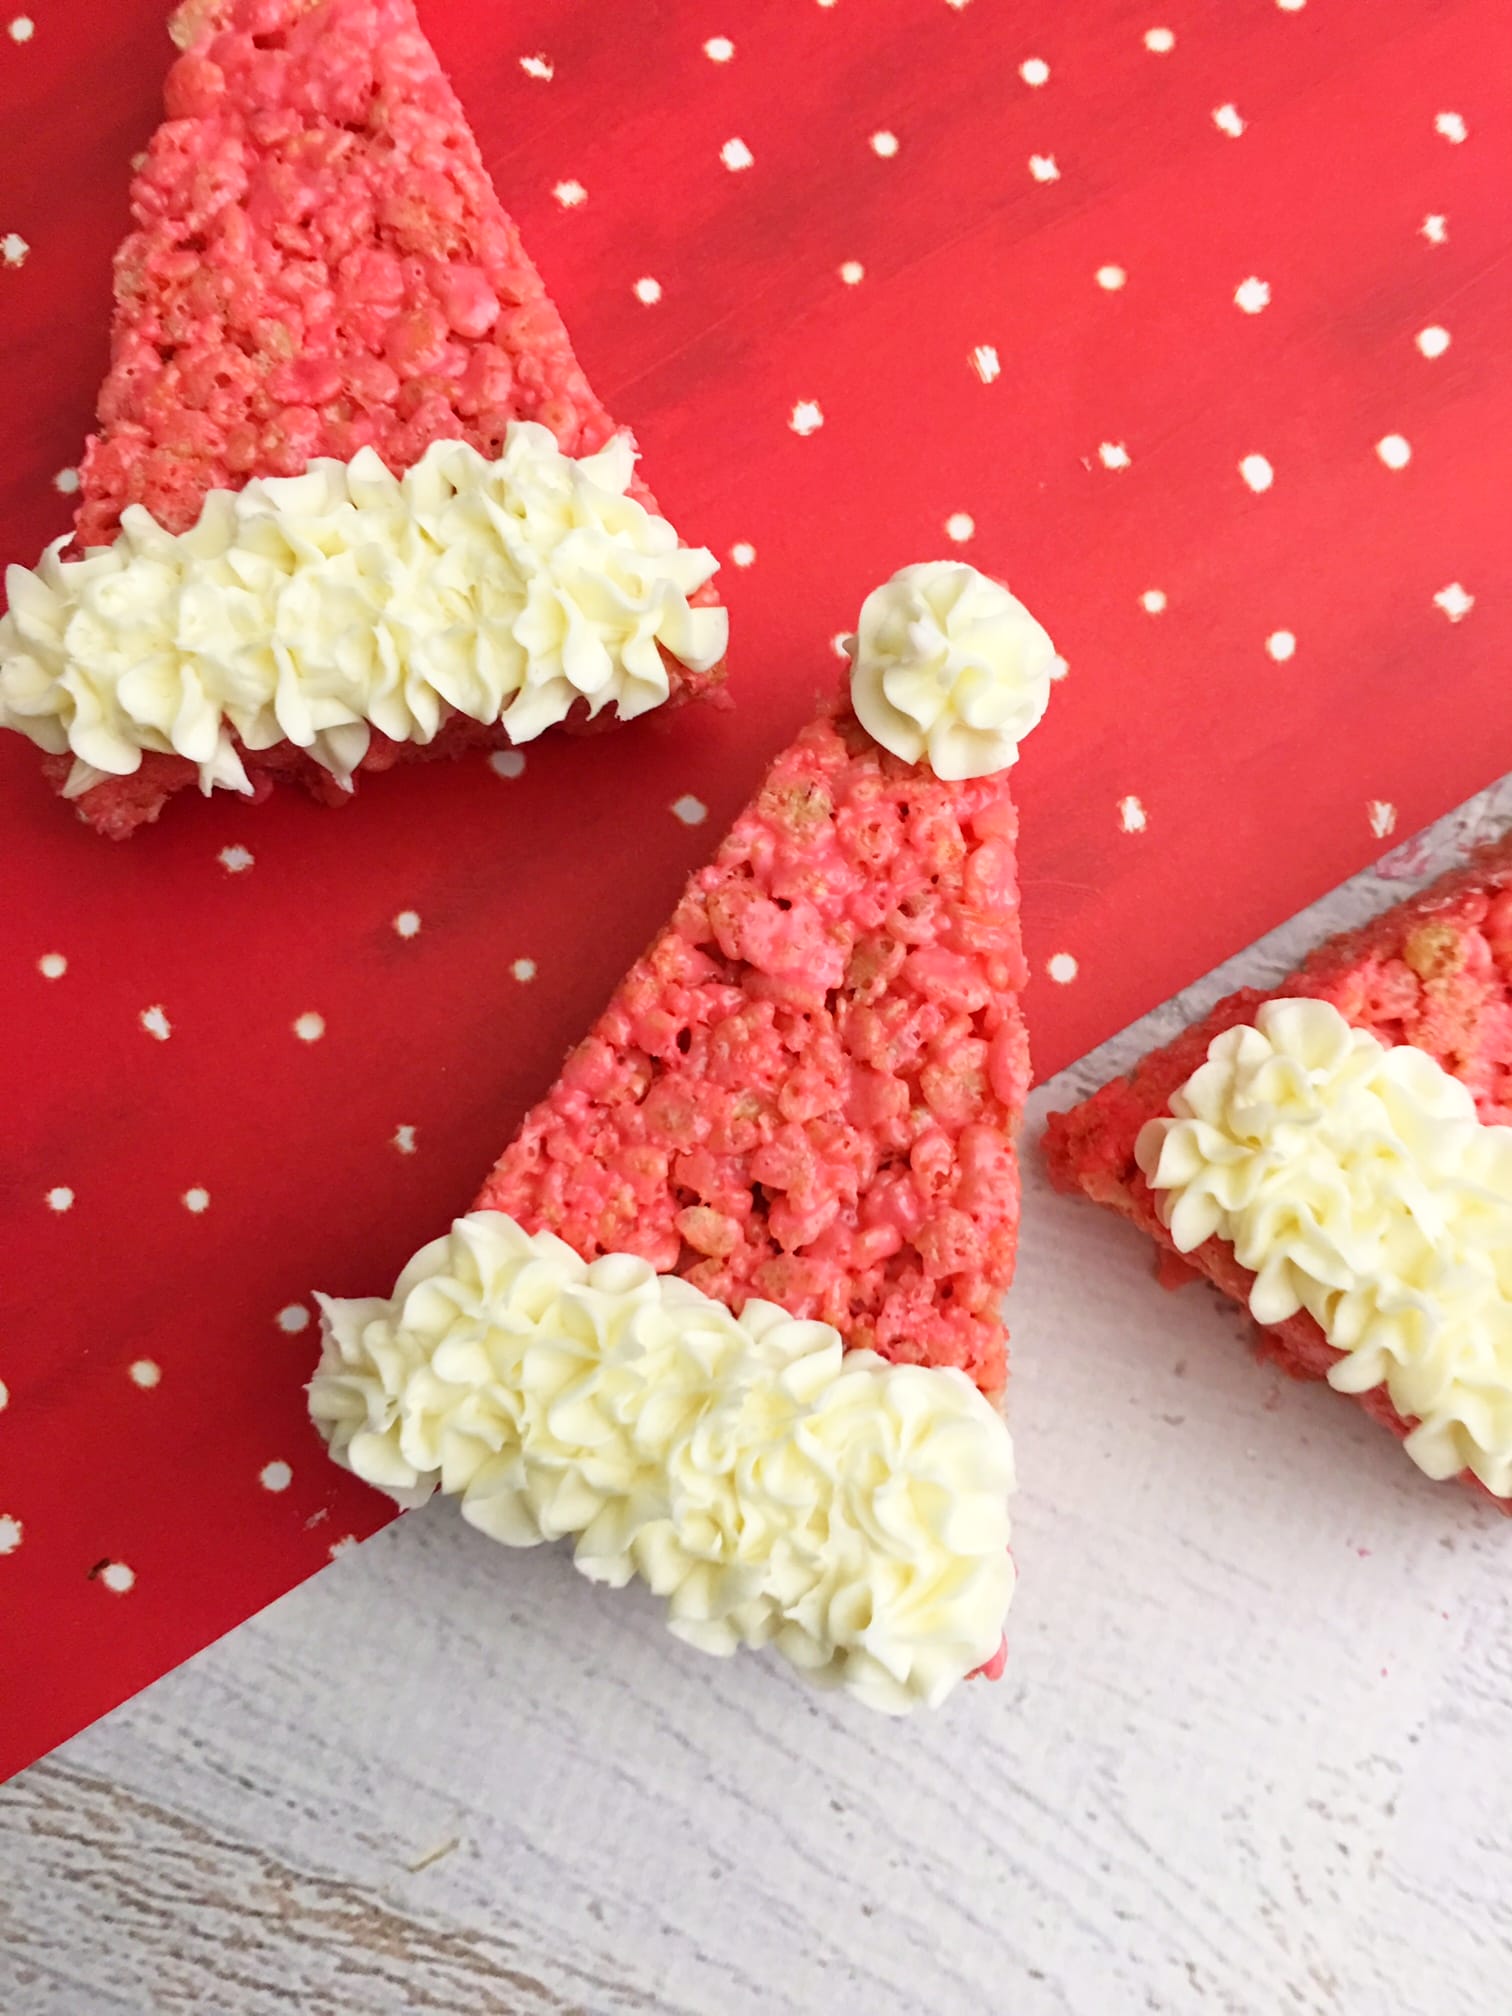 Looking for a last minute Christmas treat These cute Santa Hat Rice Krispie treats are so cute, easy to make and ready in no time